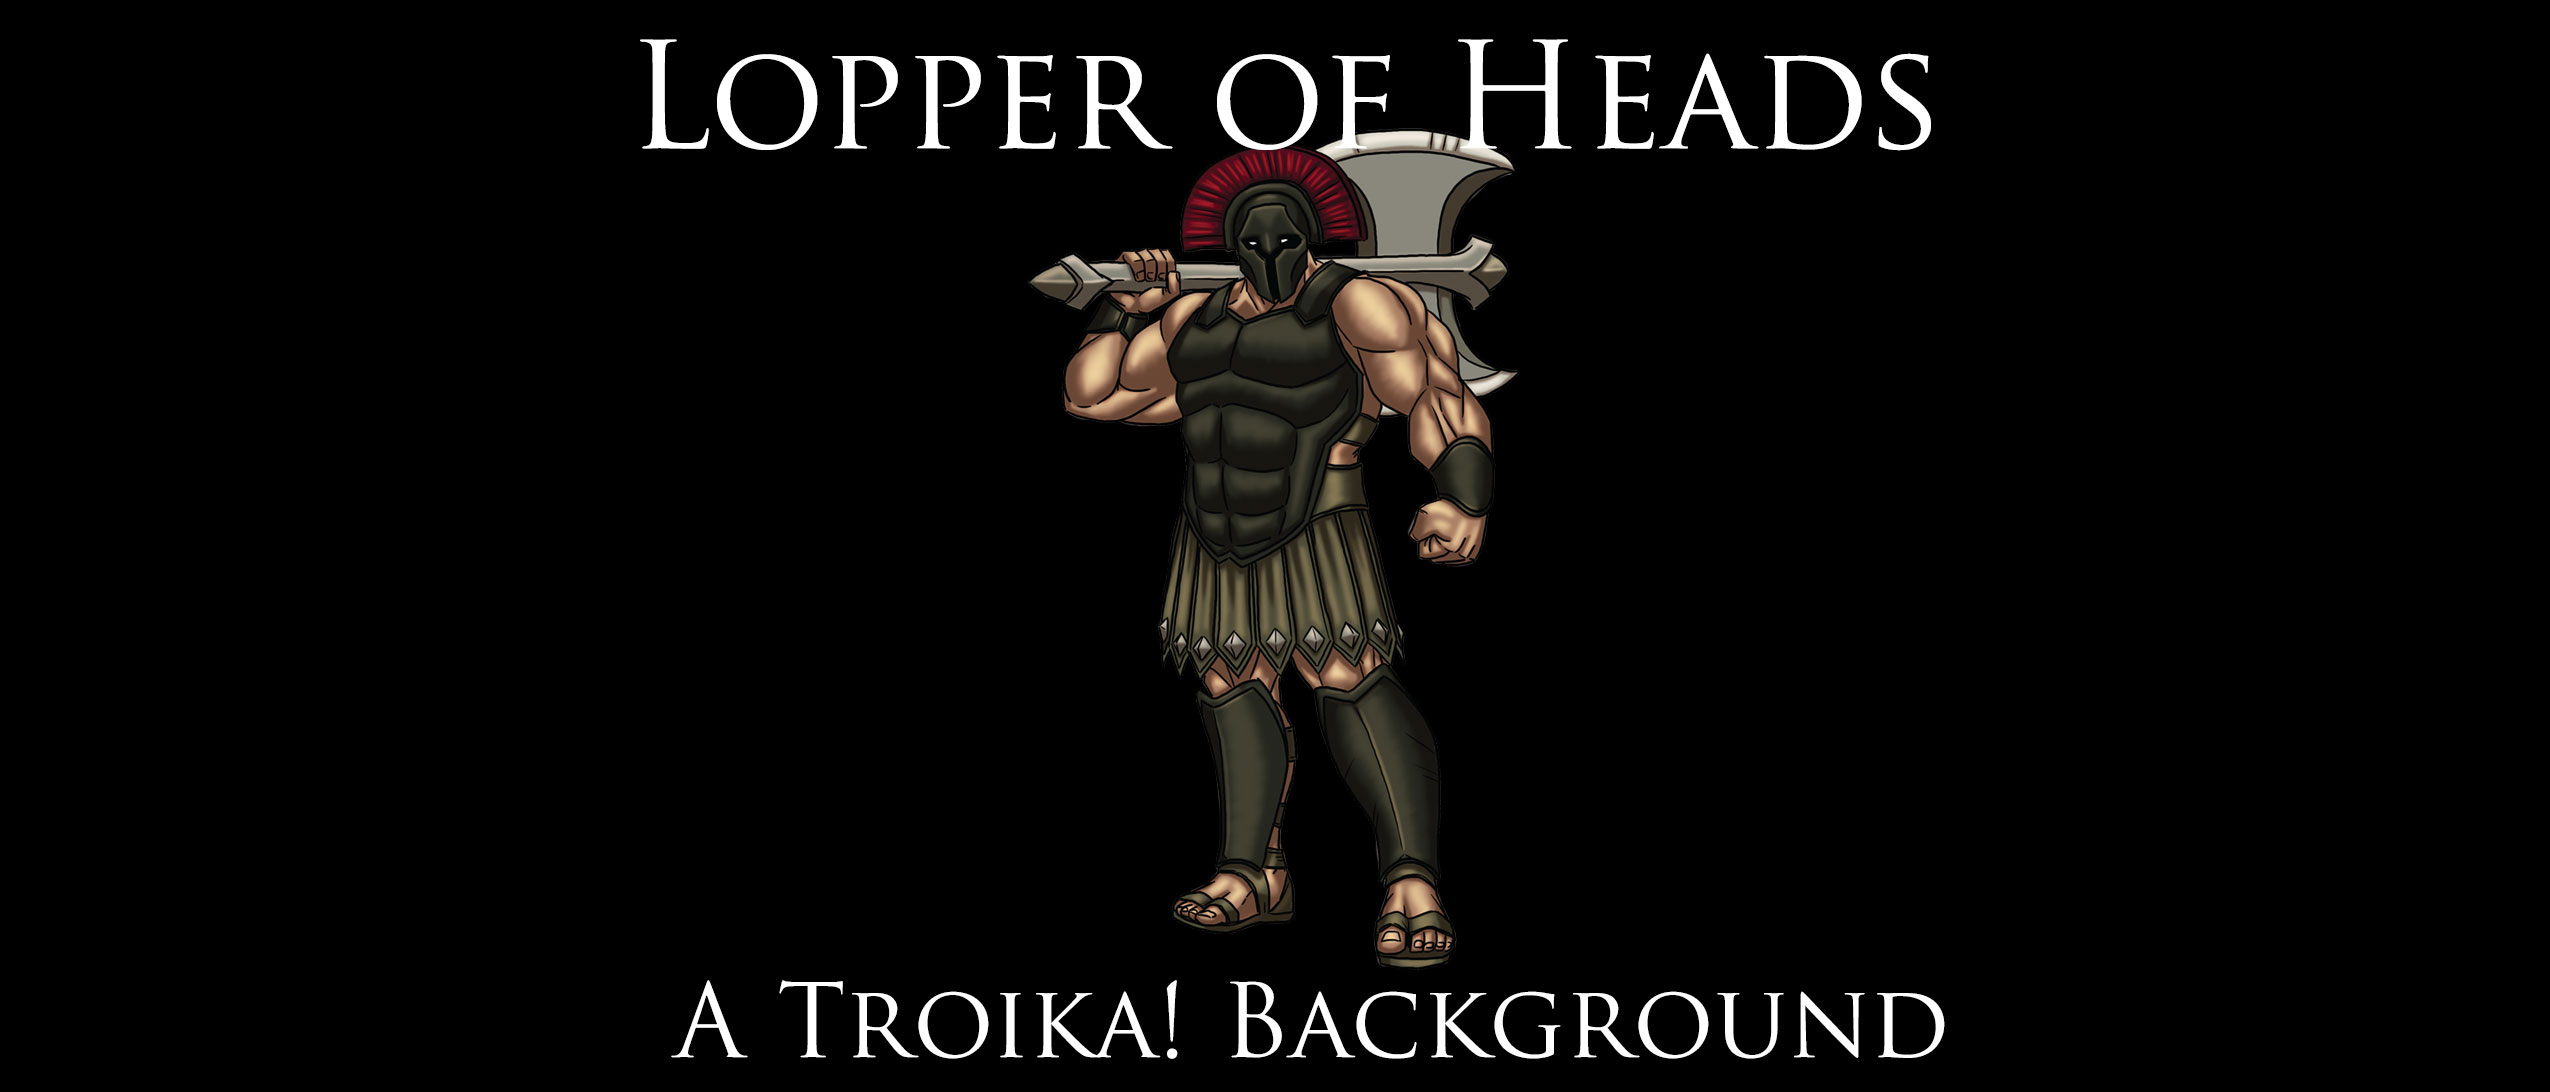 Lopper of Heads - A Troika! Background